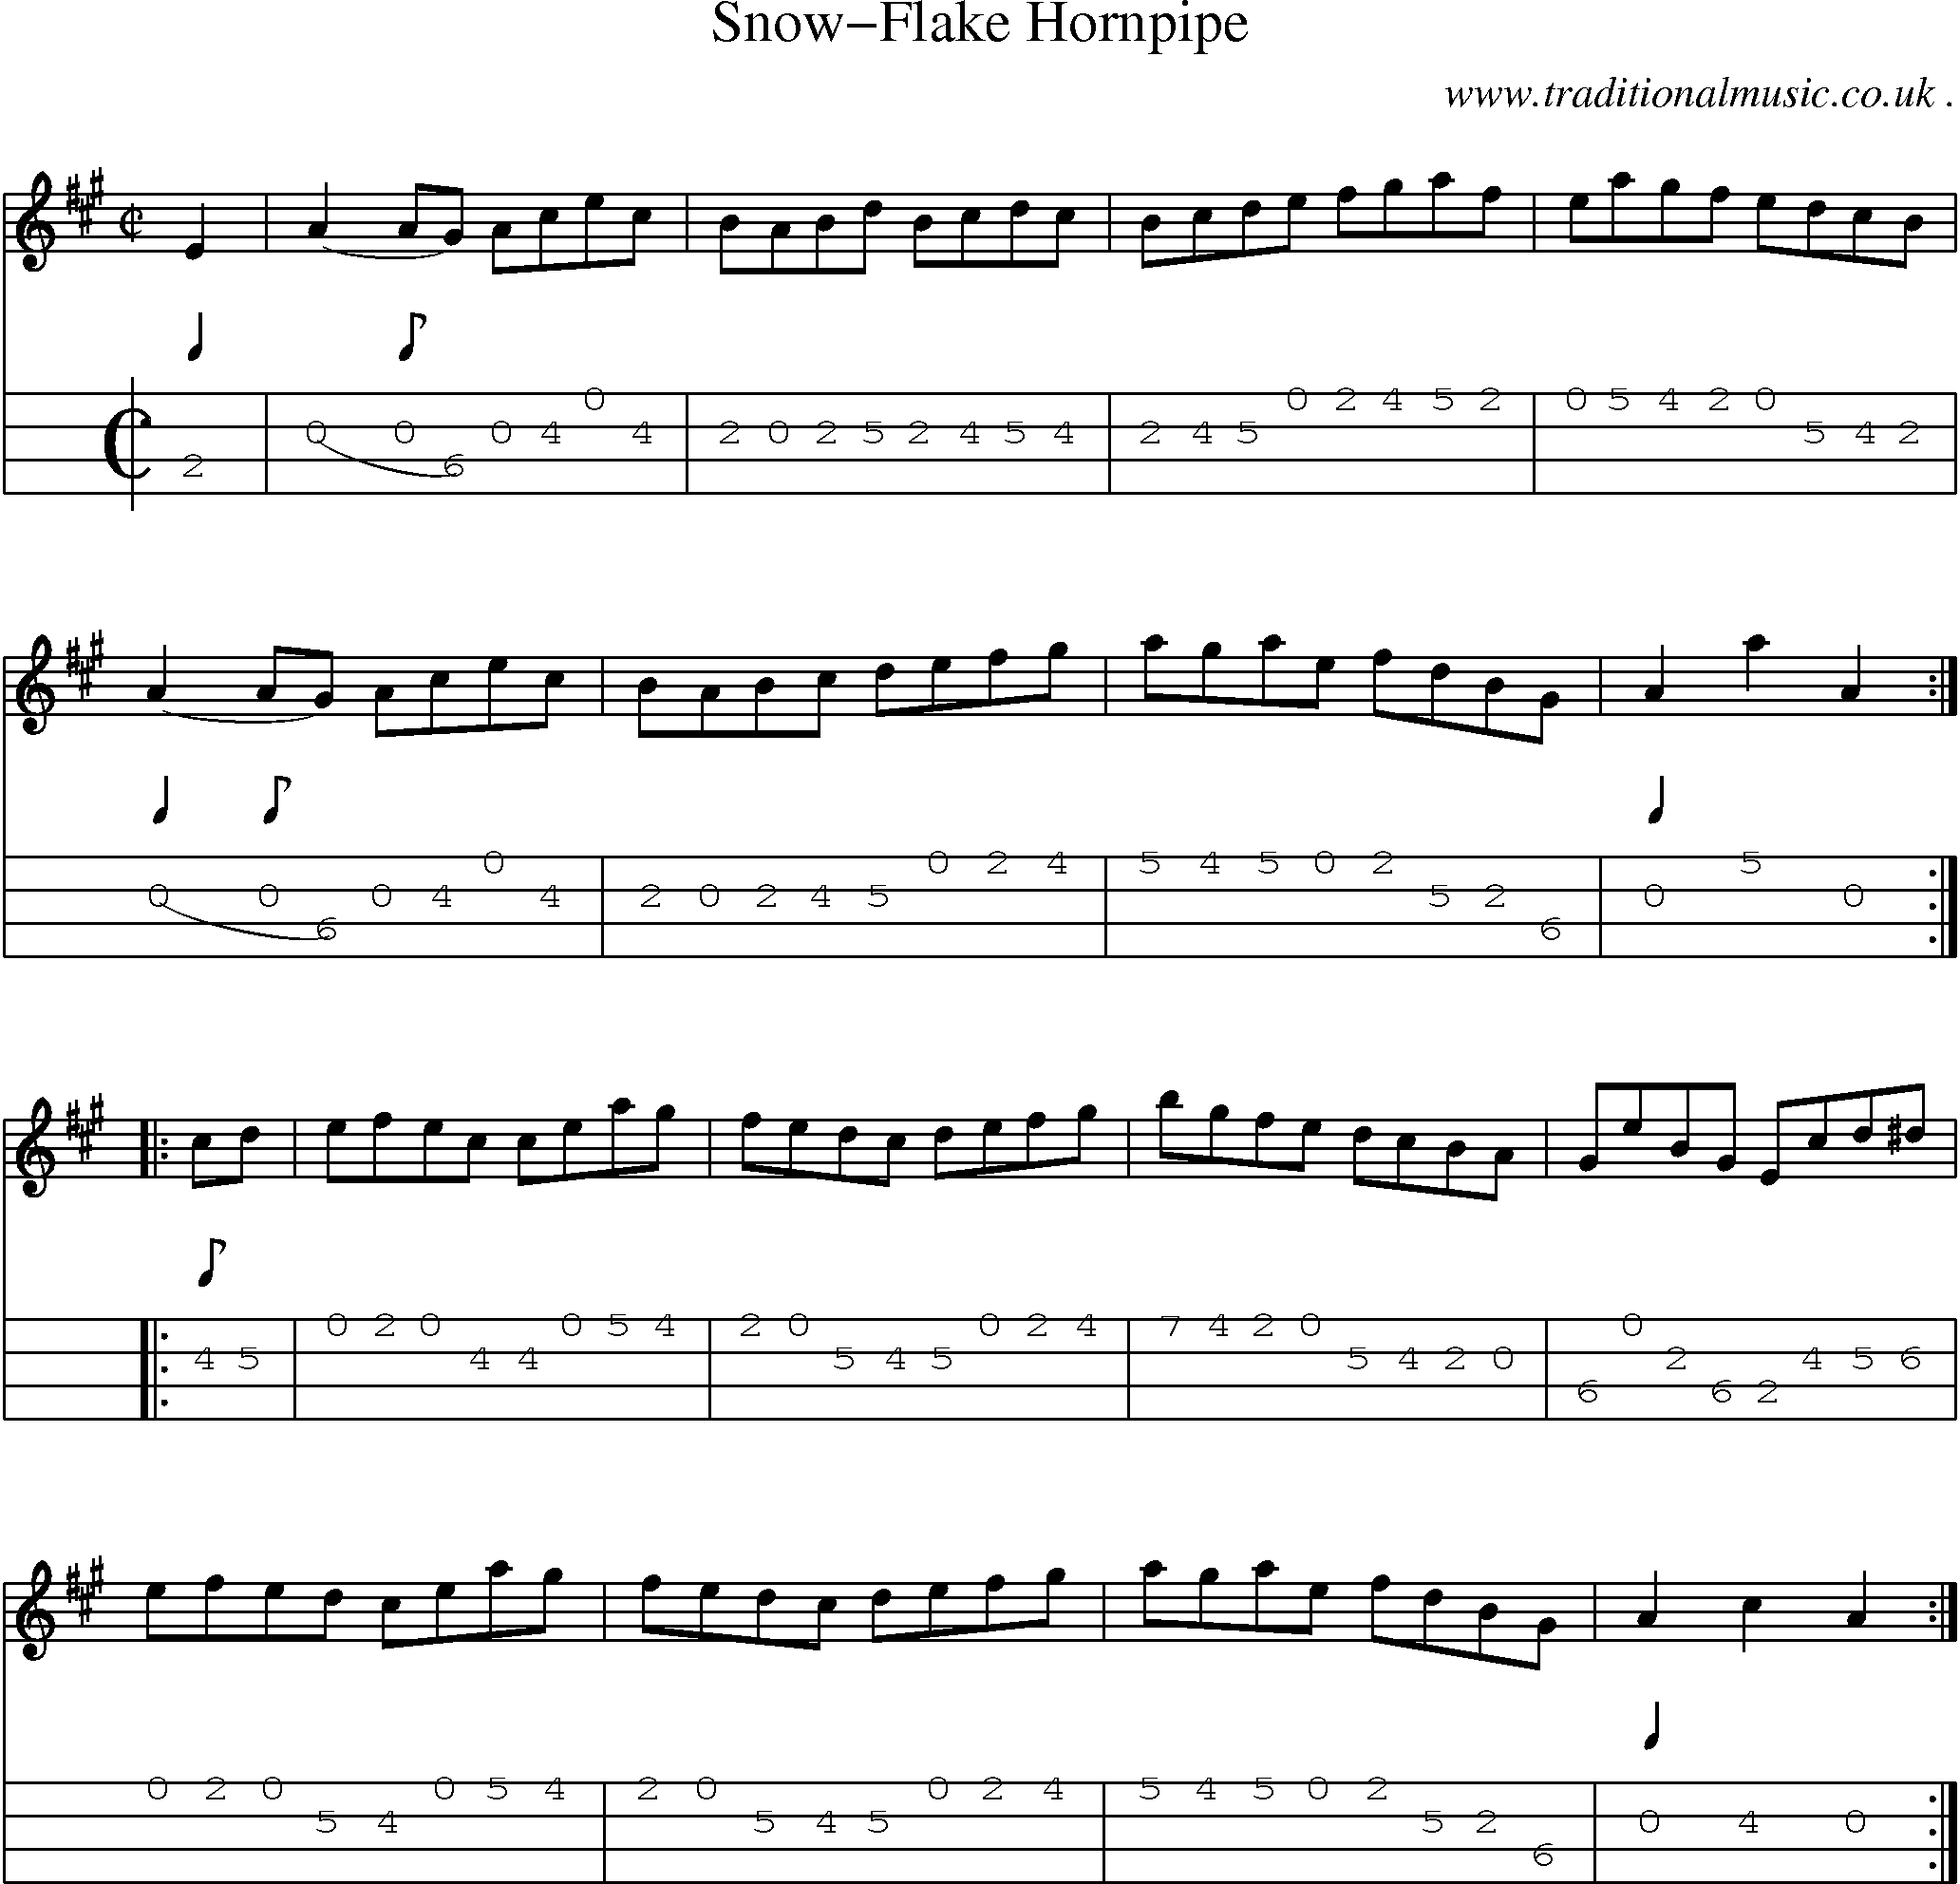 Sheet-Music and Mandolin Tabs for Snow-flake Hornpipe